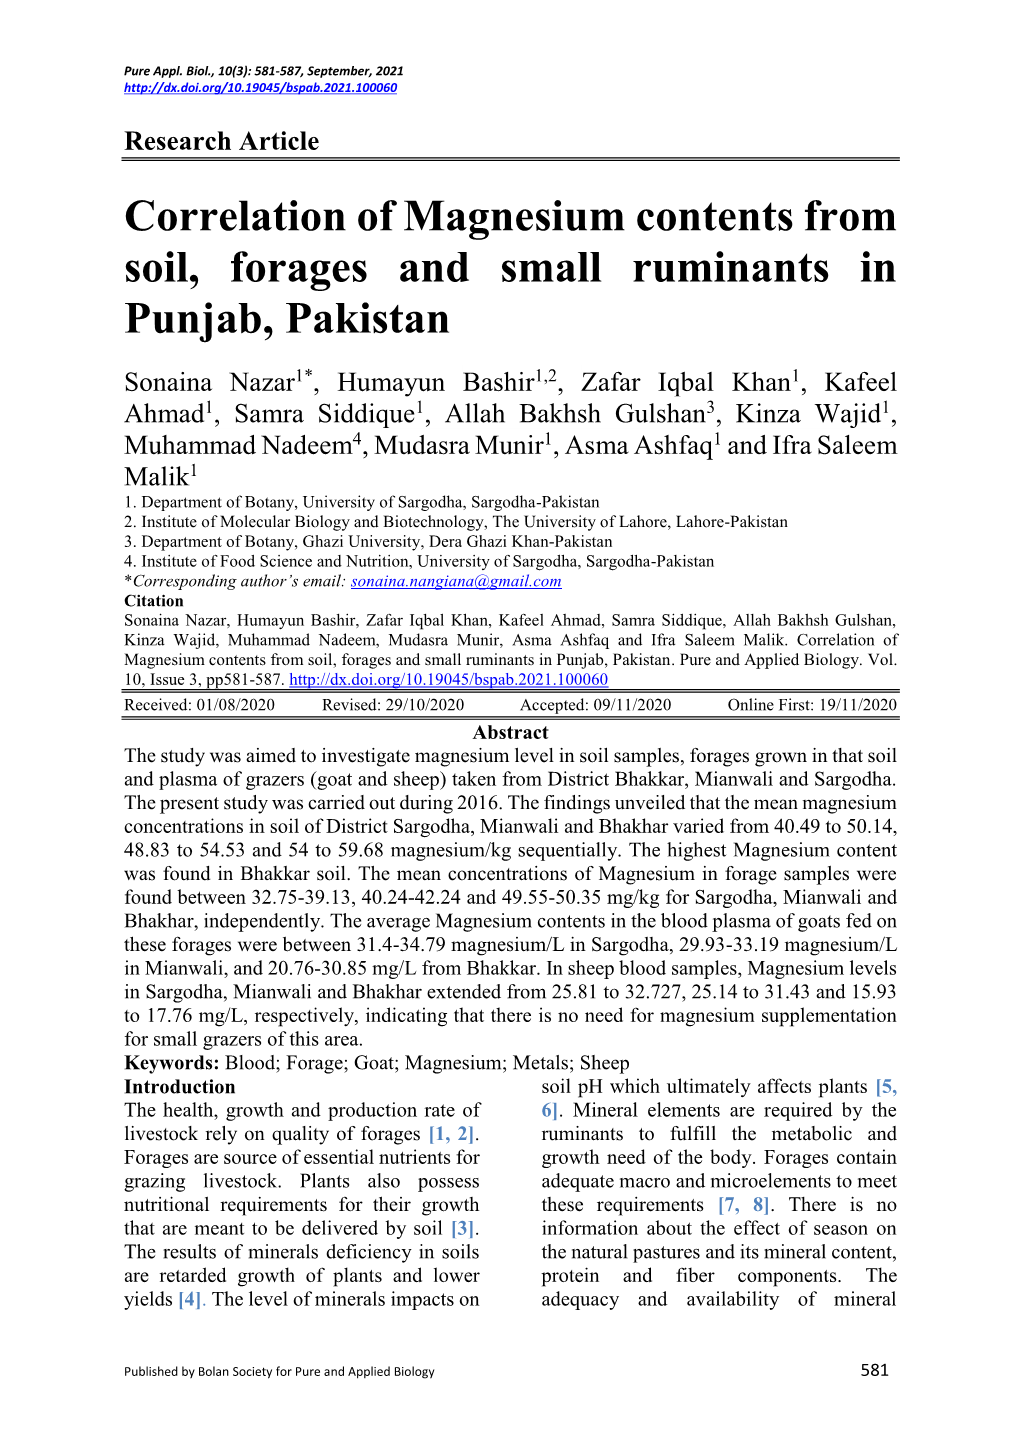 Correlation of Magnesium Contents from Soil, Forages and Small Ruminants in Punjab, Pakistan